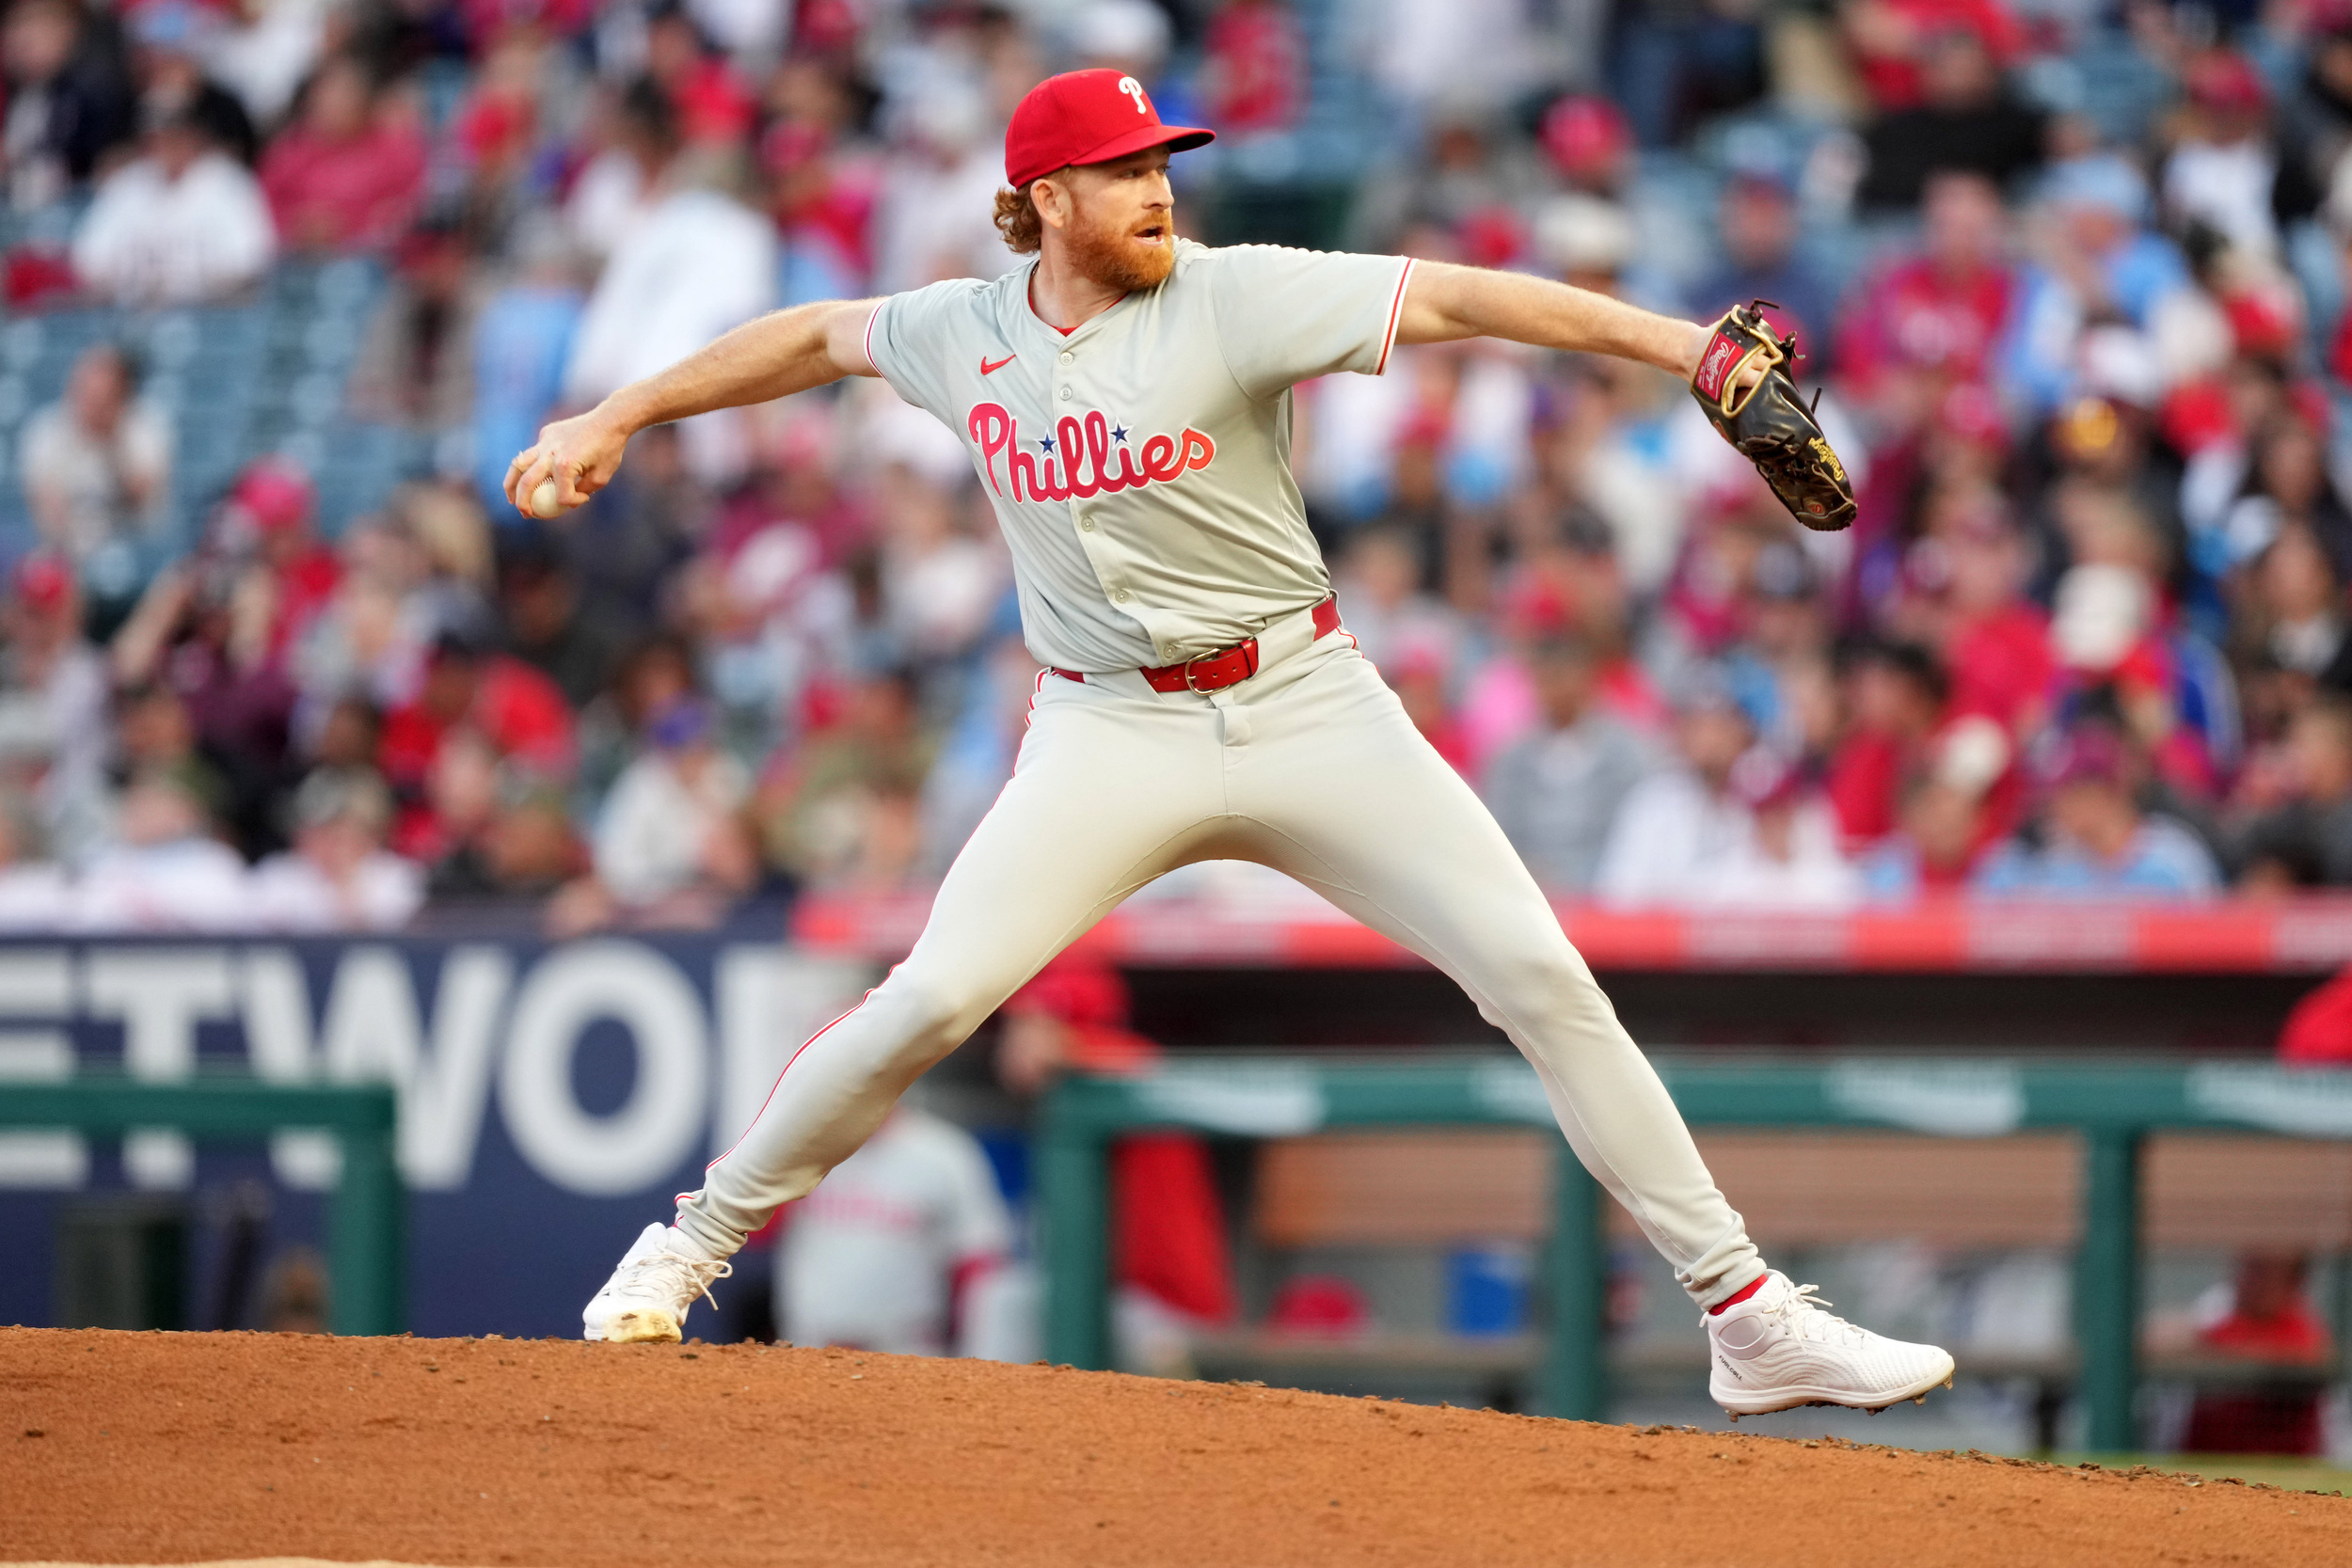 phillies considering multiple ways to keep spencer turnbull in rotation mix